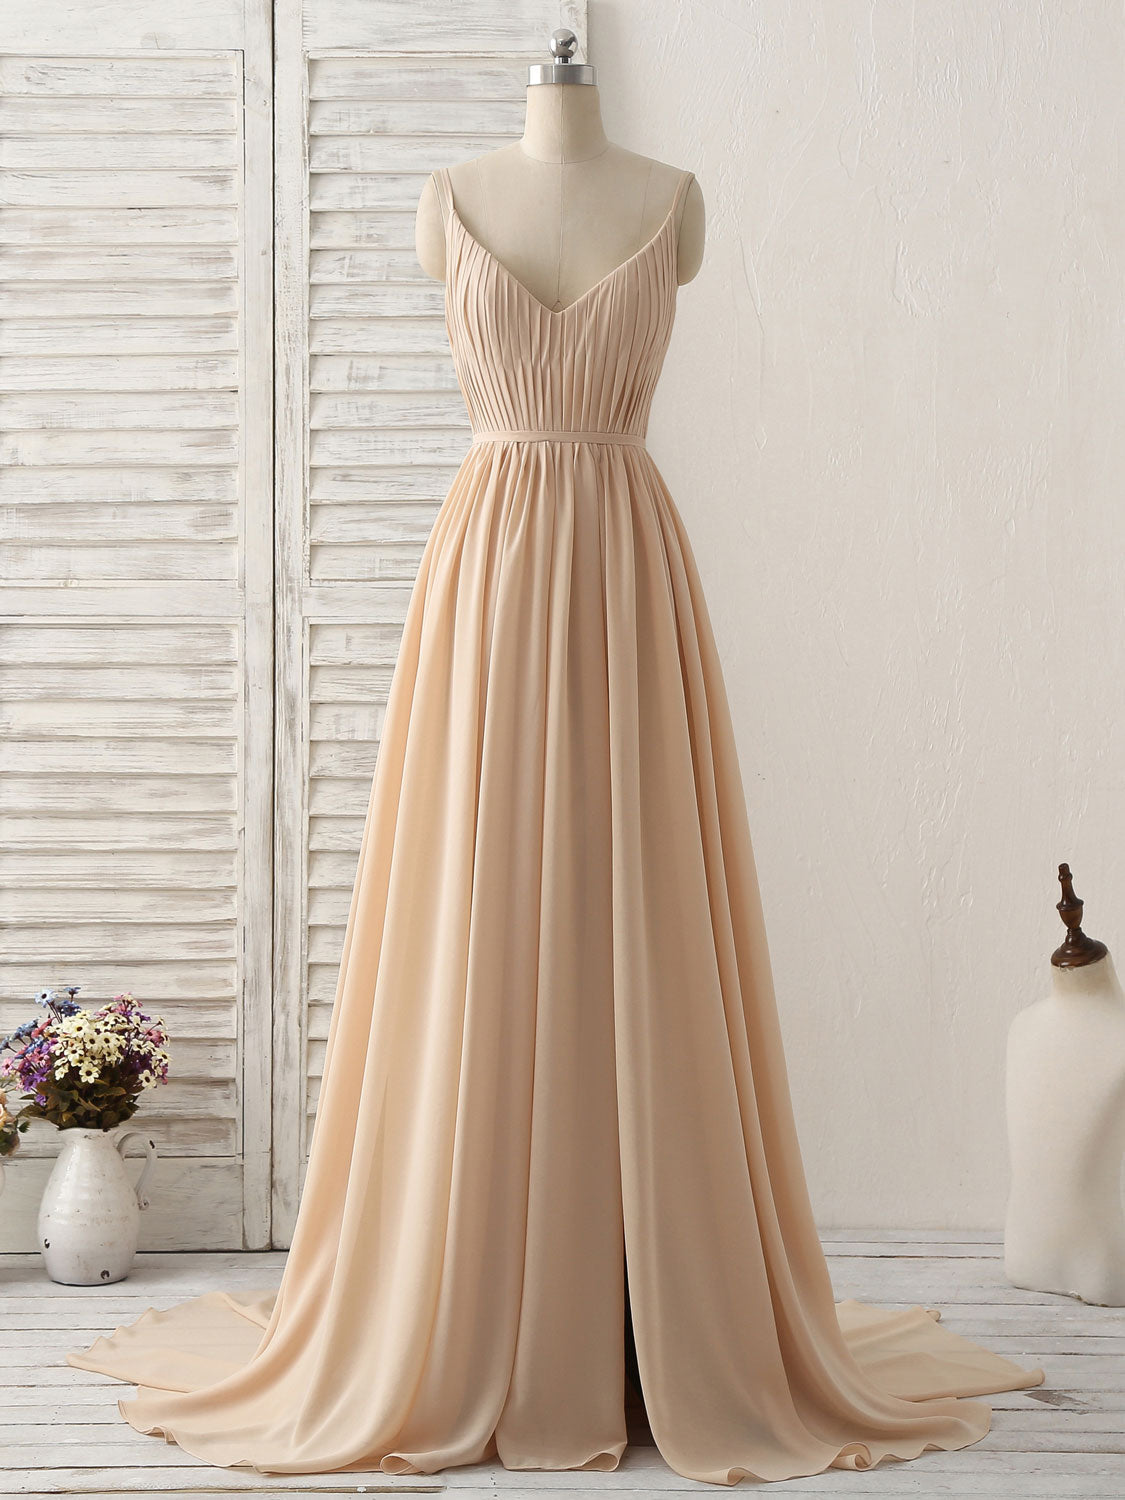 Simple Champagne Long Corset Prom Dresses V Neck Chiffon Corset Bridesmaid Dress outfit, Formal Dresses For Wedding Guest